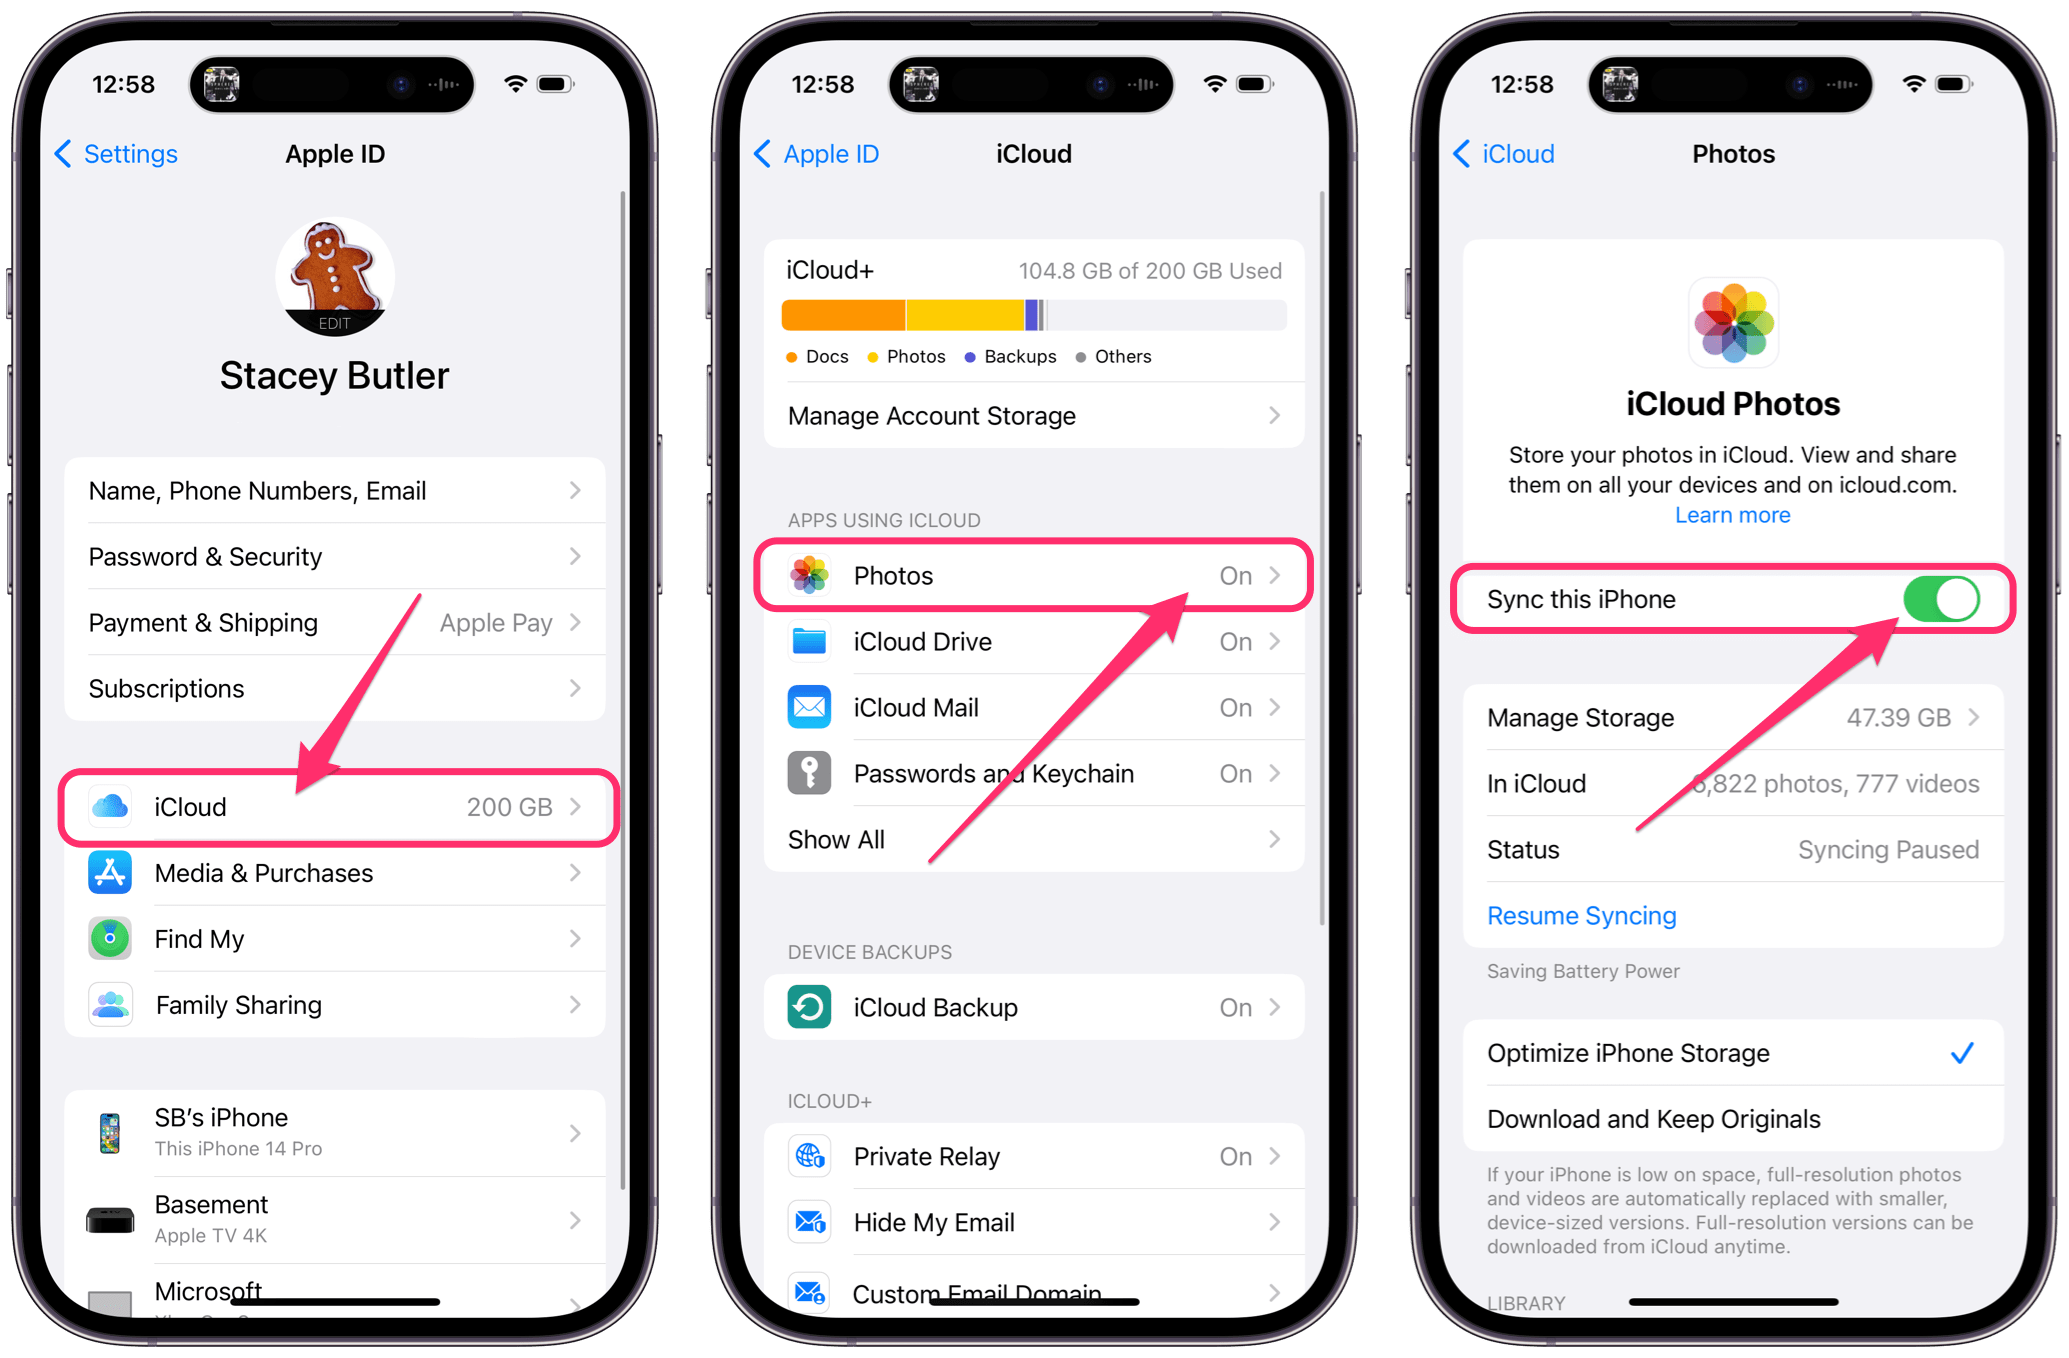 turn off iCloud photos syncing in iPhone settings